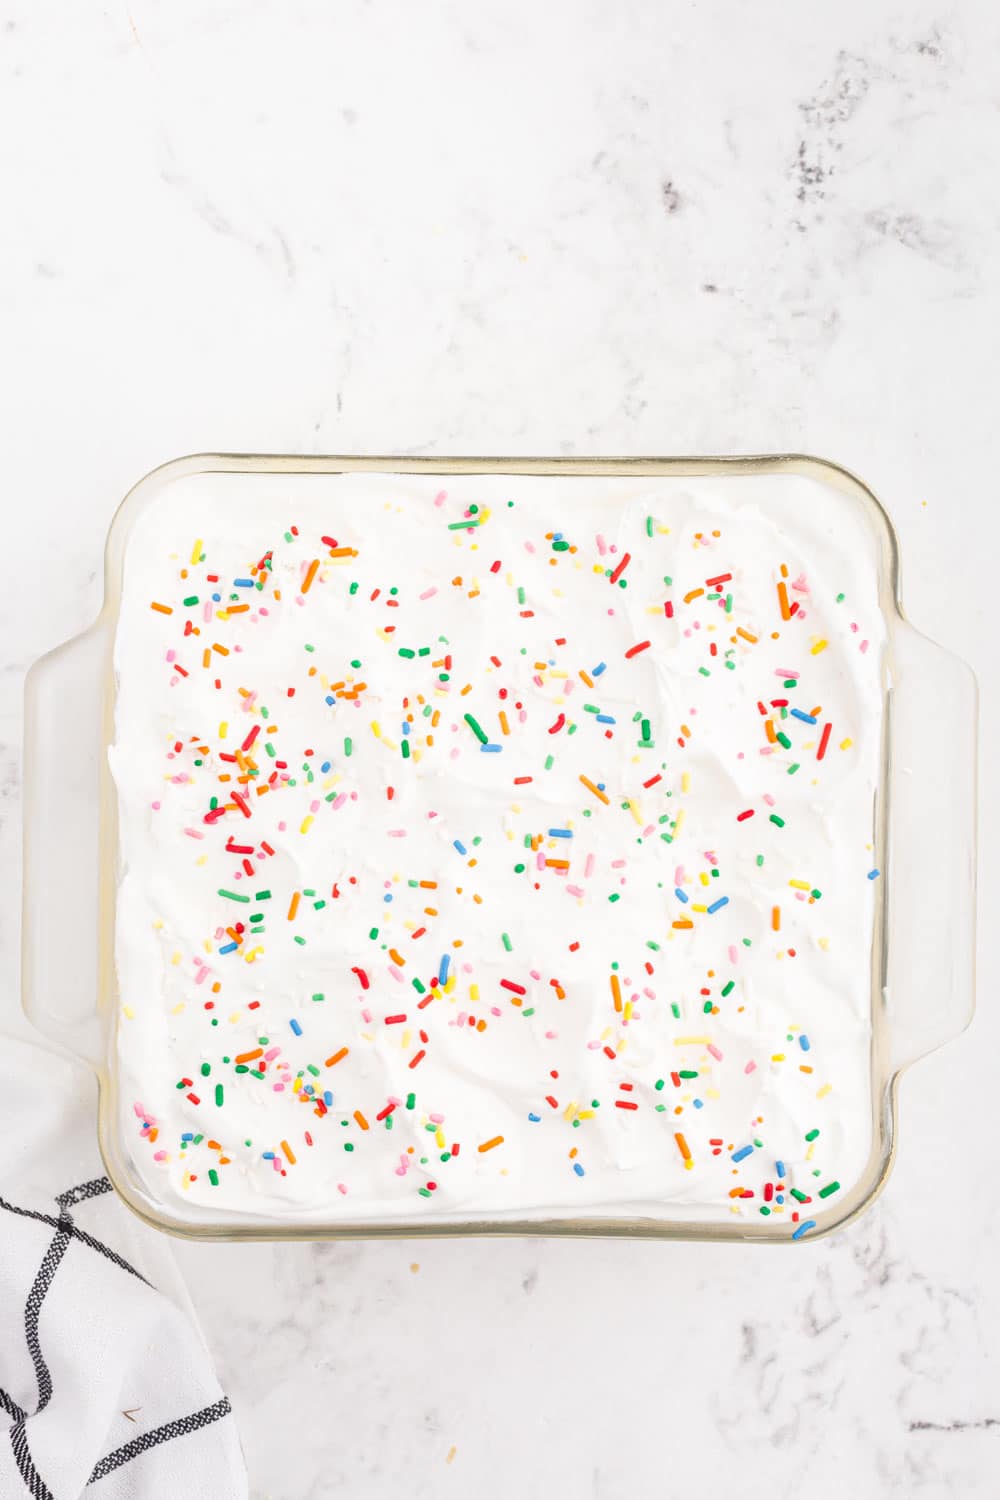 Square baking dish with dessert topped with whipped cream and rainbow sprinkles.